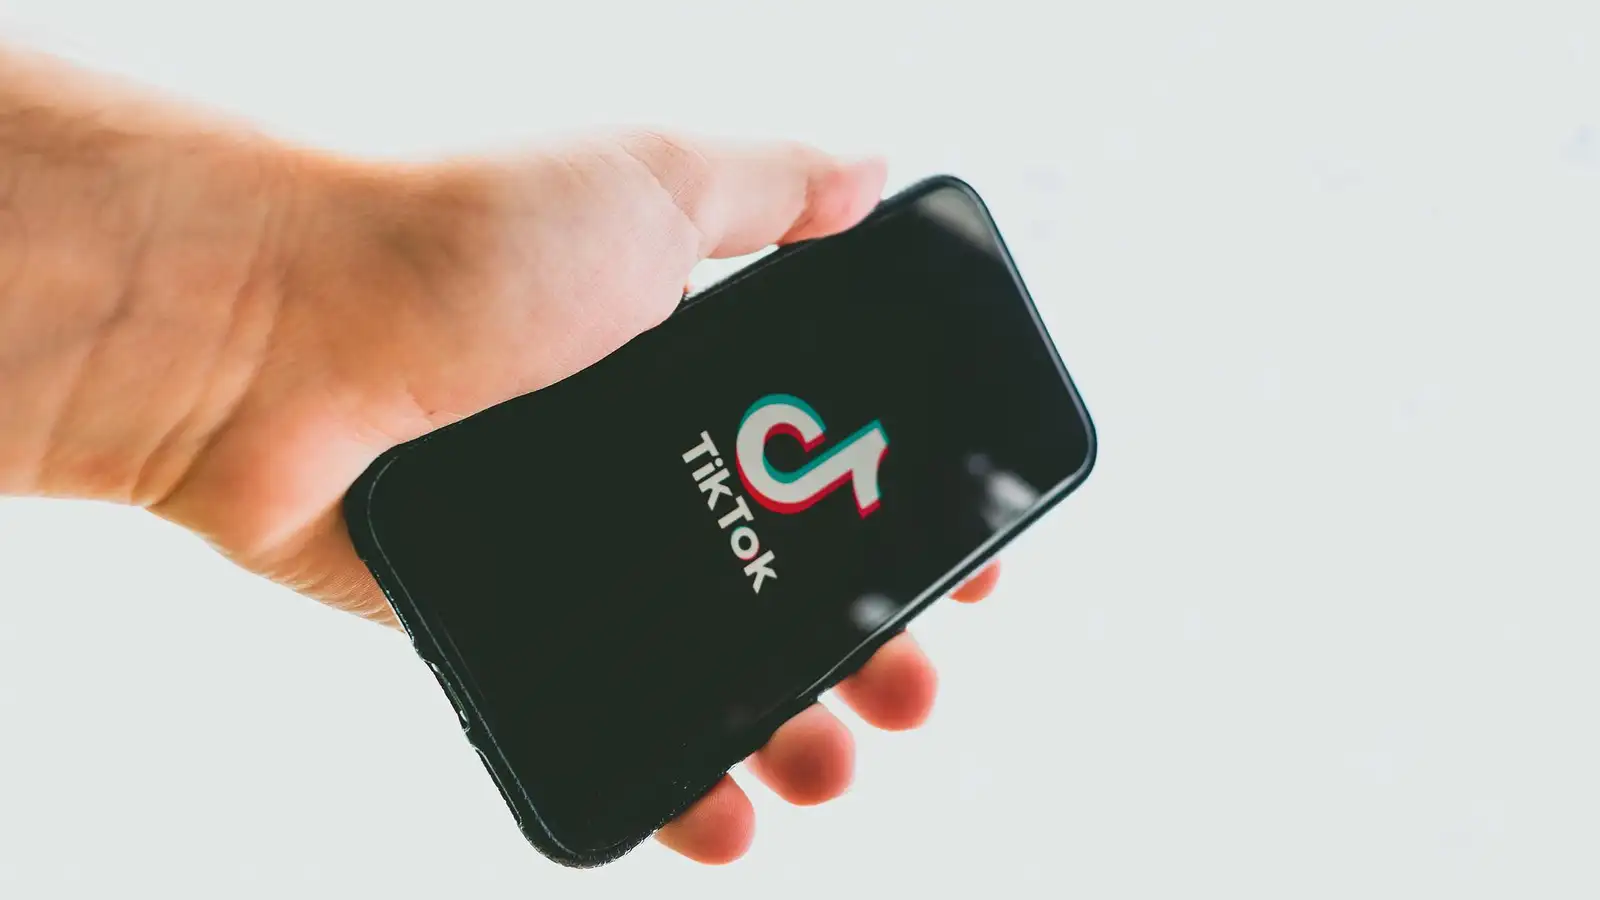 The United States asks Apple and Google to remove TikTok from its stores